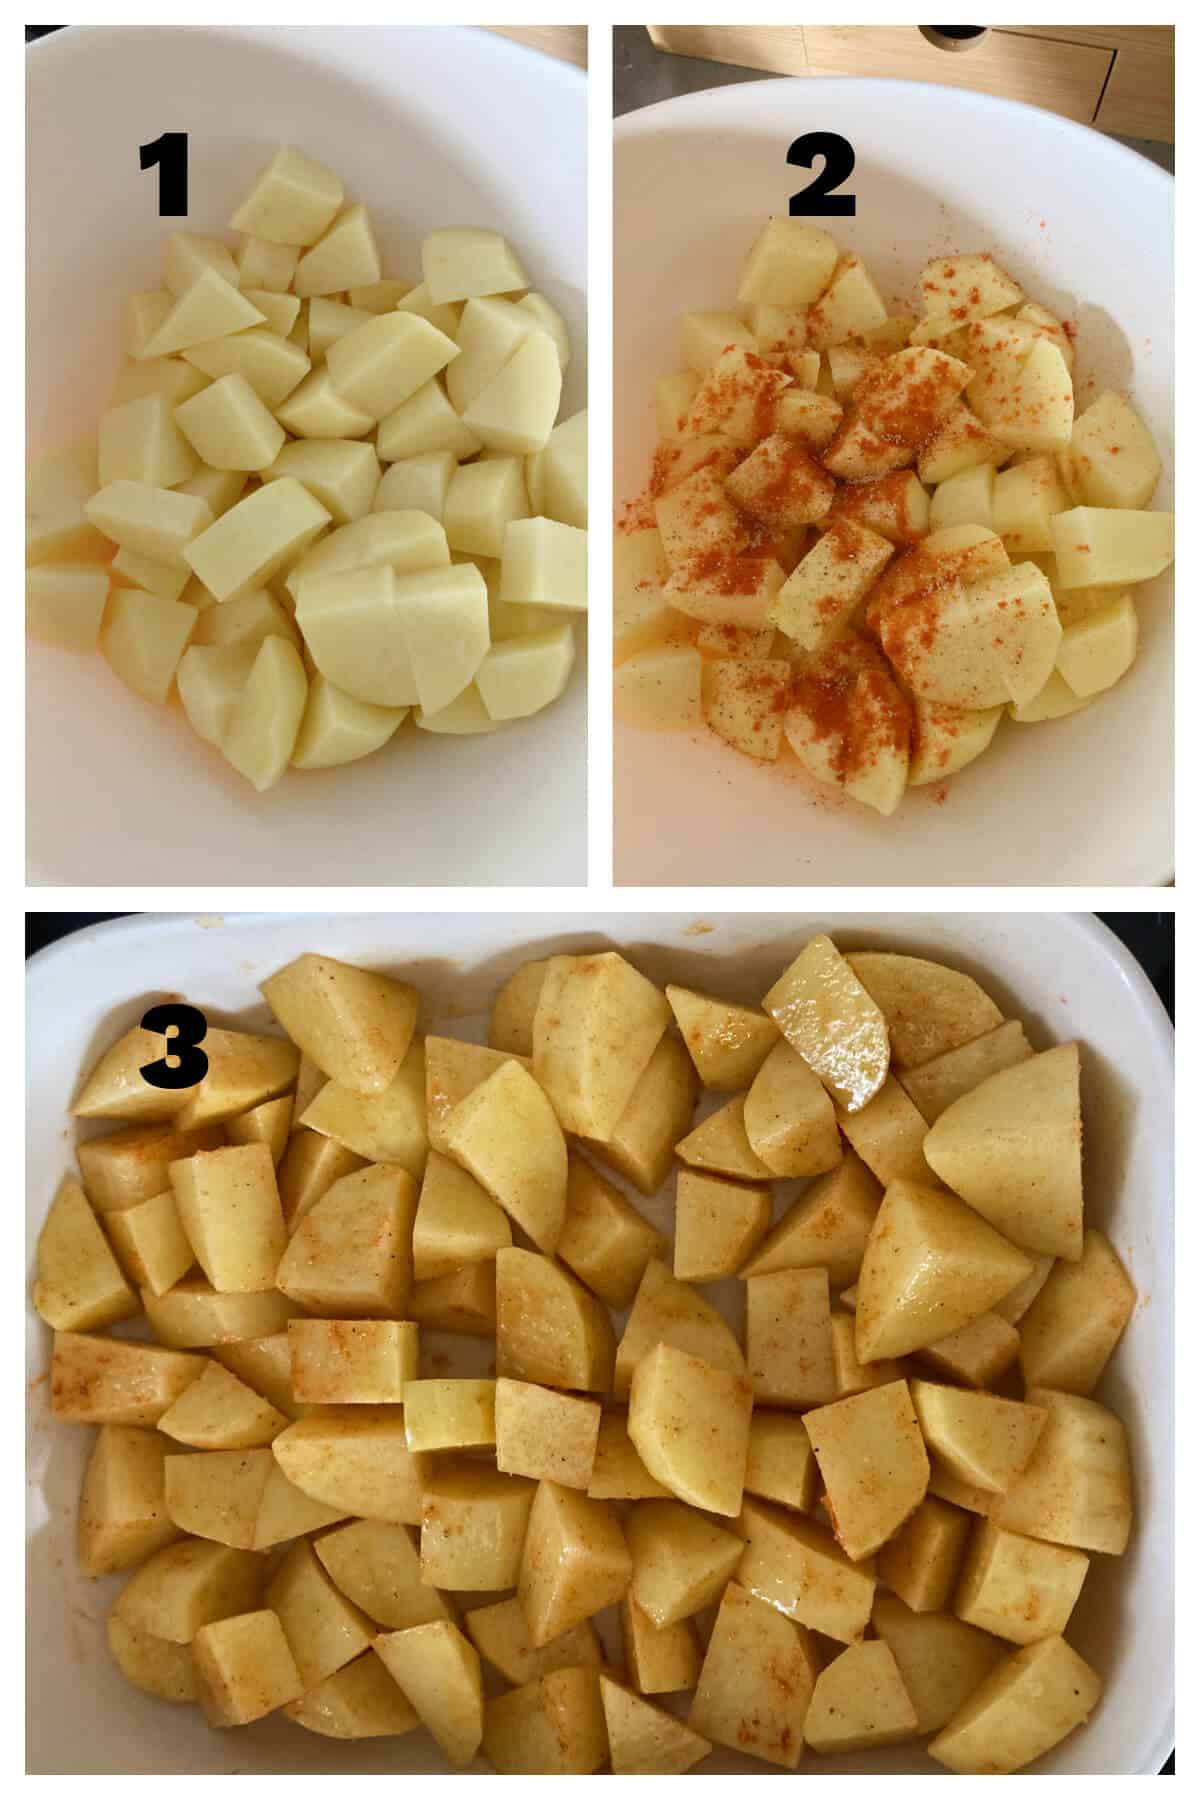 Collage of 3 photos to show how to prepare the potatoes for the casserole.